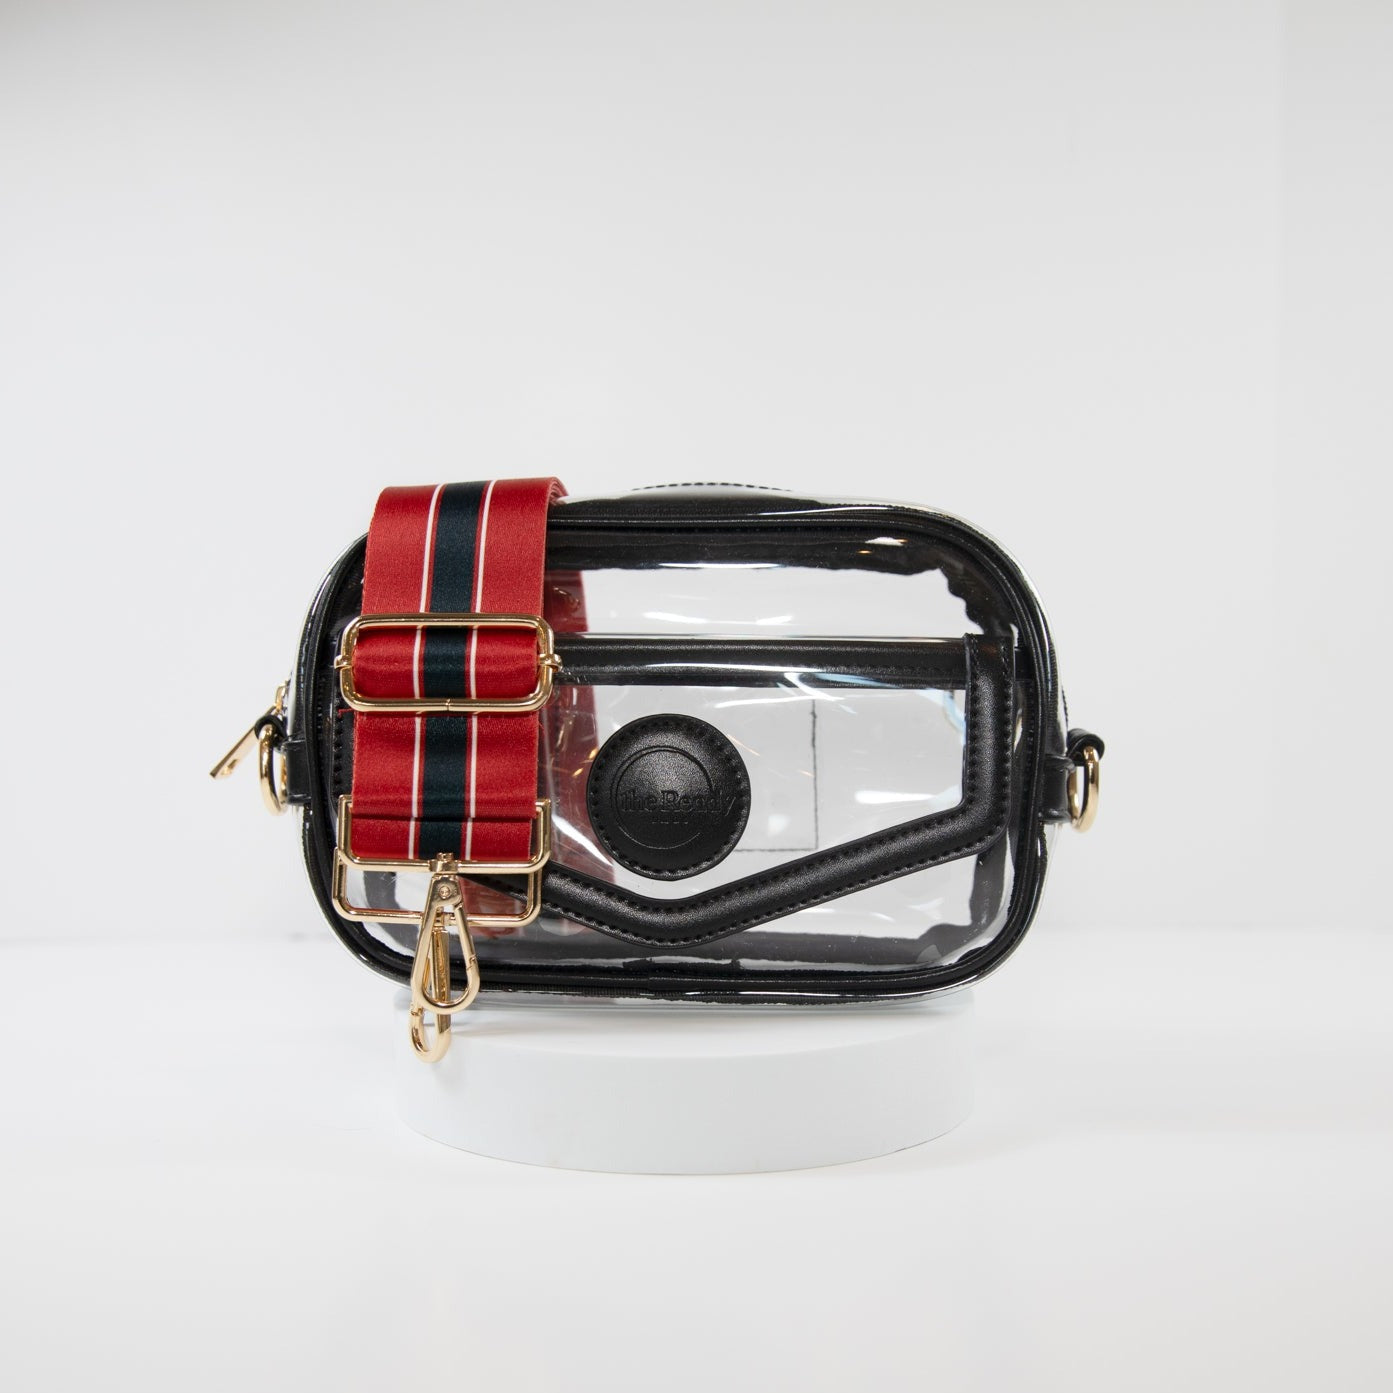 Clear stadium bag with black leather trim, front facing, with a crossbody strap in Houston Texan team colors.